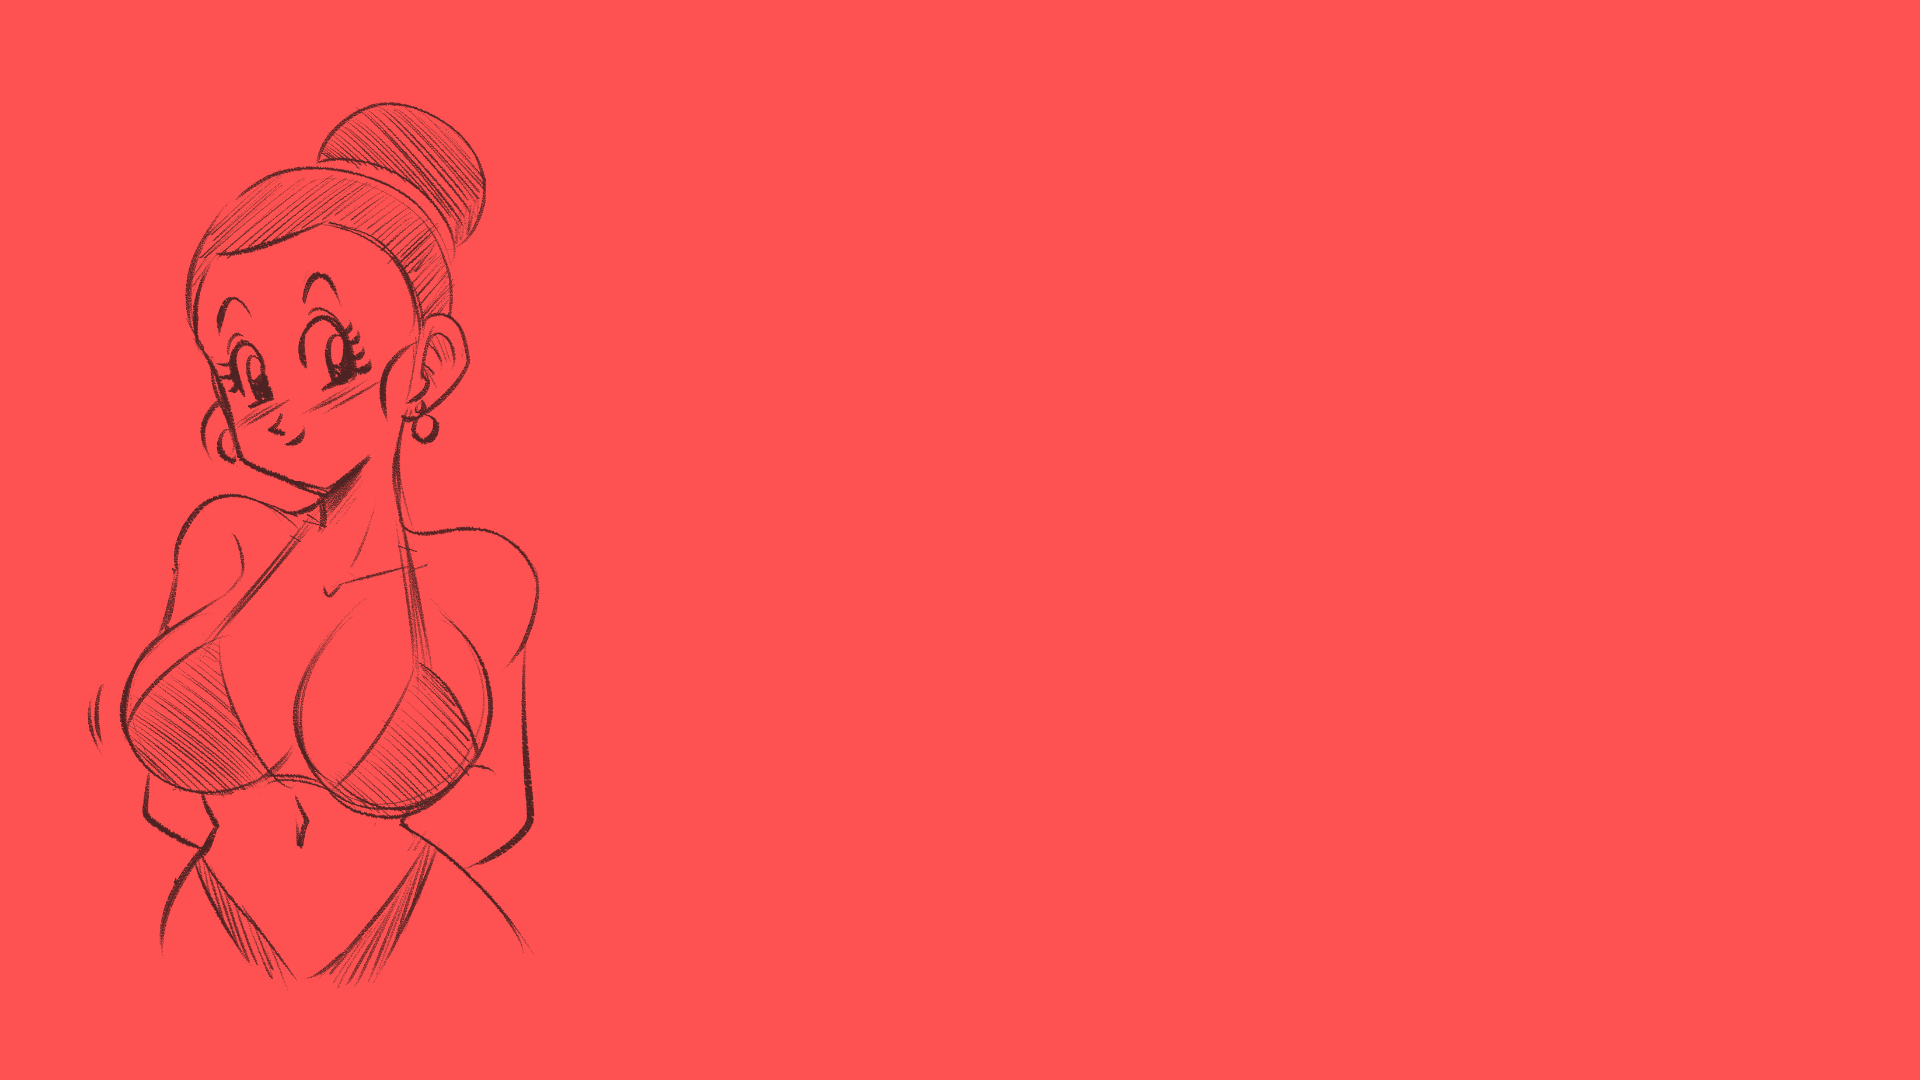 Anime 1920x1080 Chi-Chi Dragon Ball Dragon Ball Z hairbun minimalism sketches bikini boobs big boobs anime girls earring bare shoulders belly button blushing arm(s) behind back smiling hips wide hips straps bra straps monochrome red background simple background